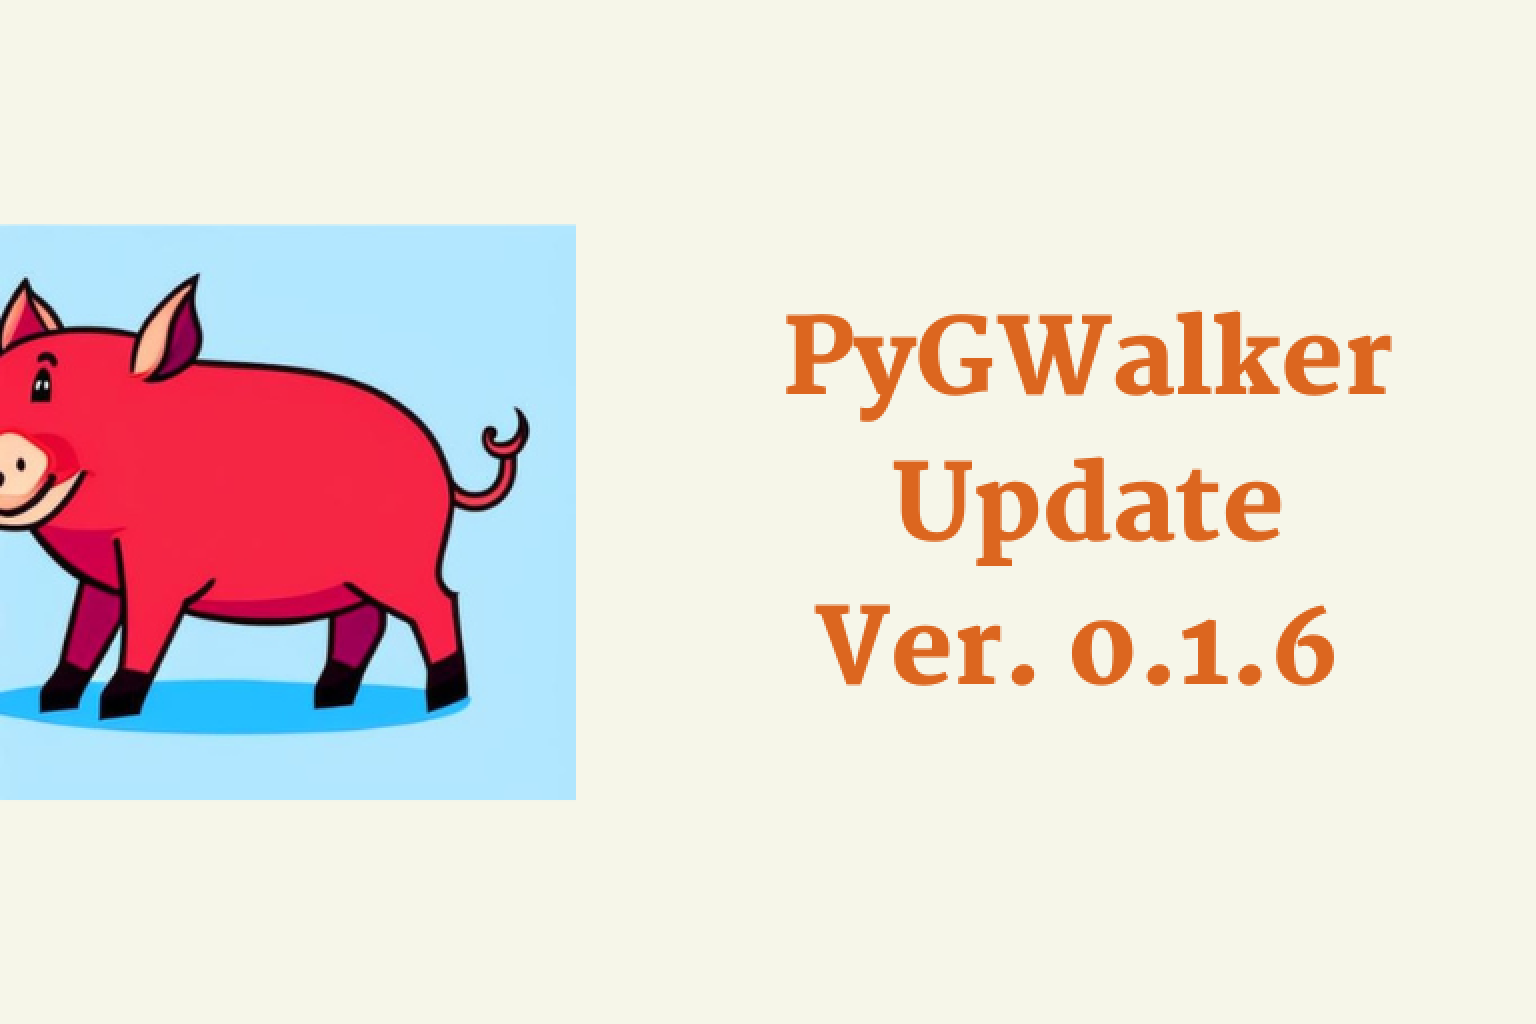 With the 0.1.6. Release for PyGWalker, you can easily turn your Pandas or Polars Dataframe into Data Visualizations with a Tableau-like interface, and export the Visualzation to Code. You can also import the code back to PyGWalker at any time!